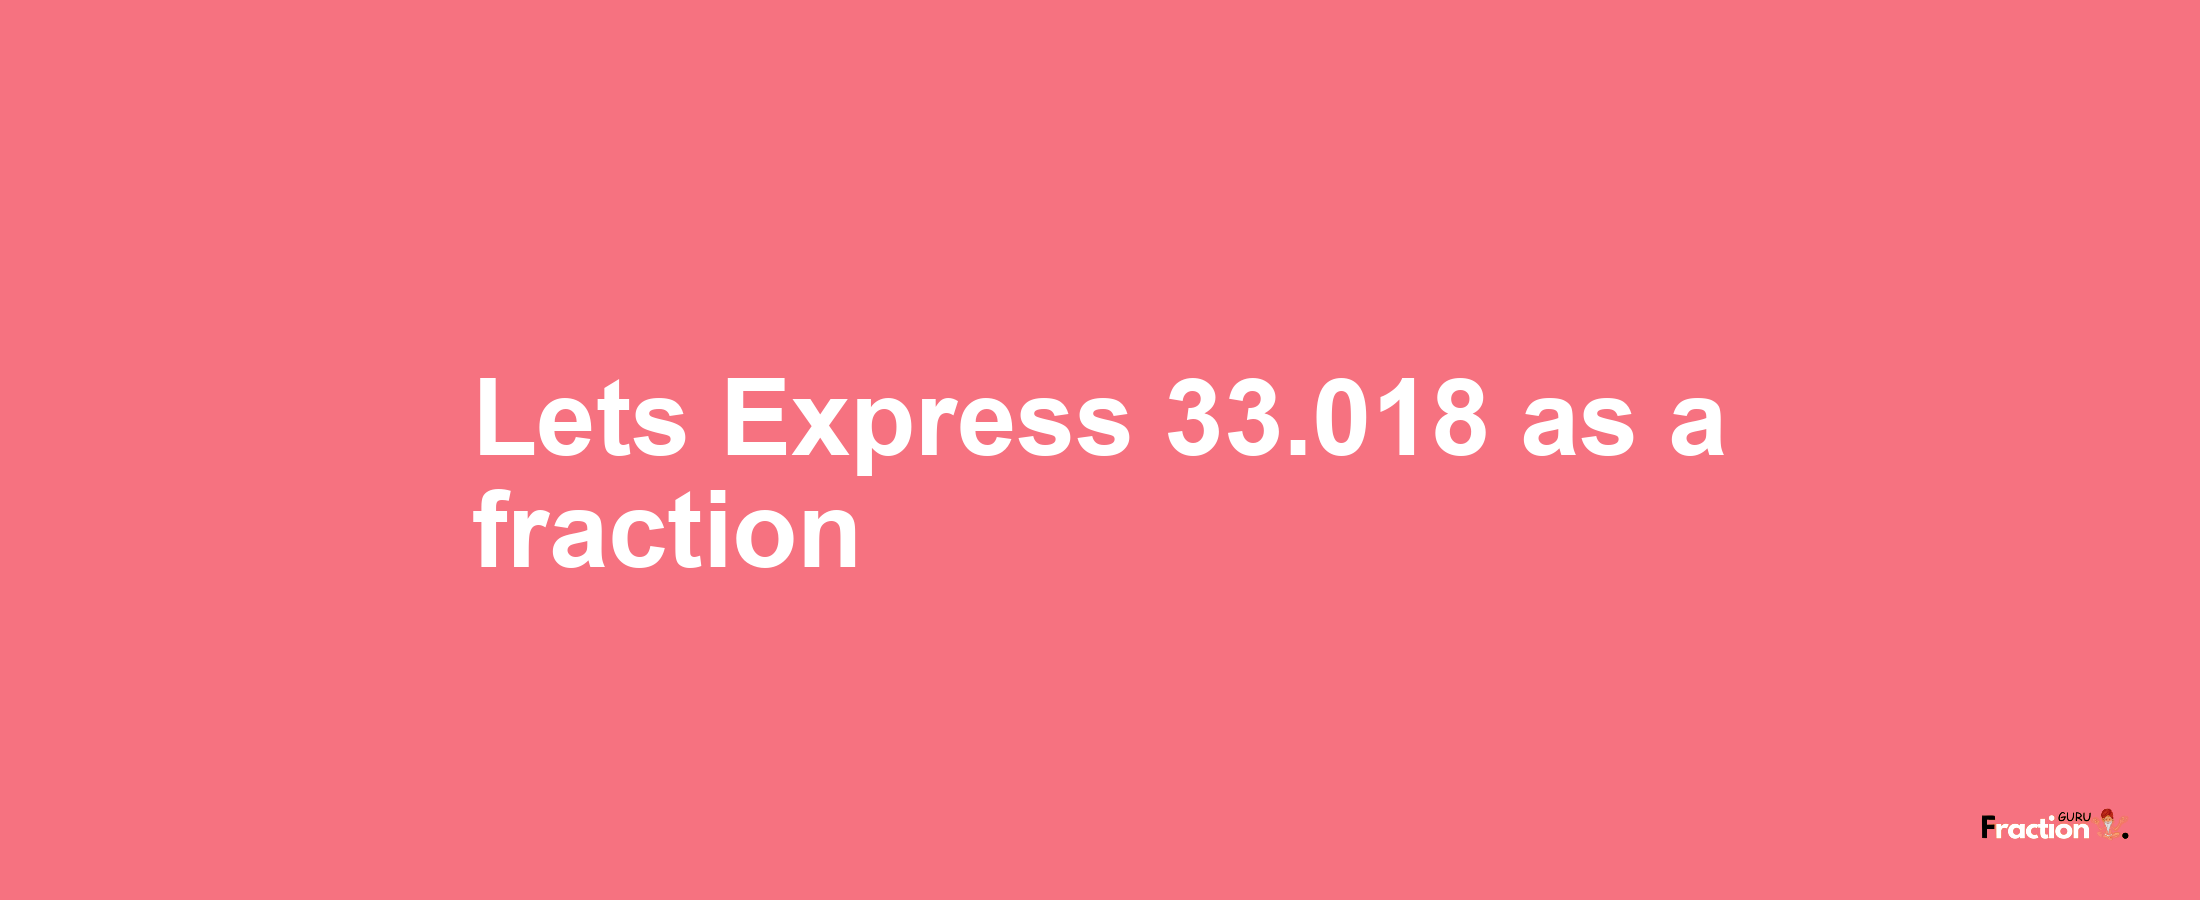 Lets Express 33.018 as afraction